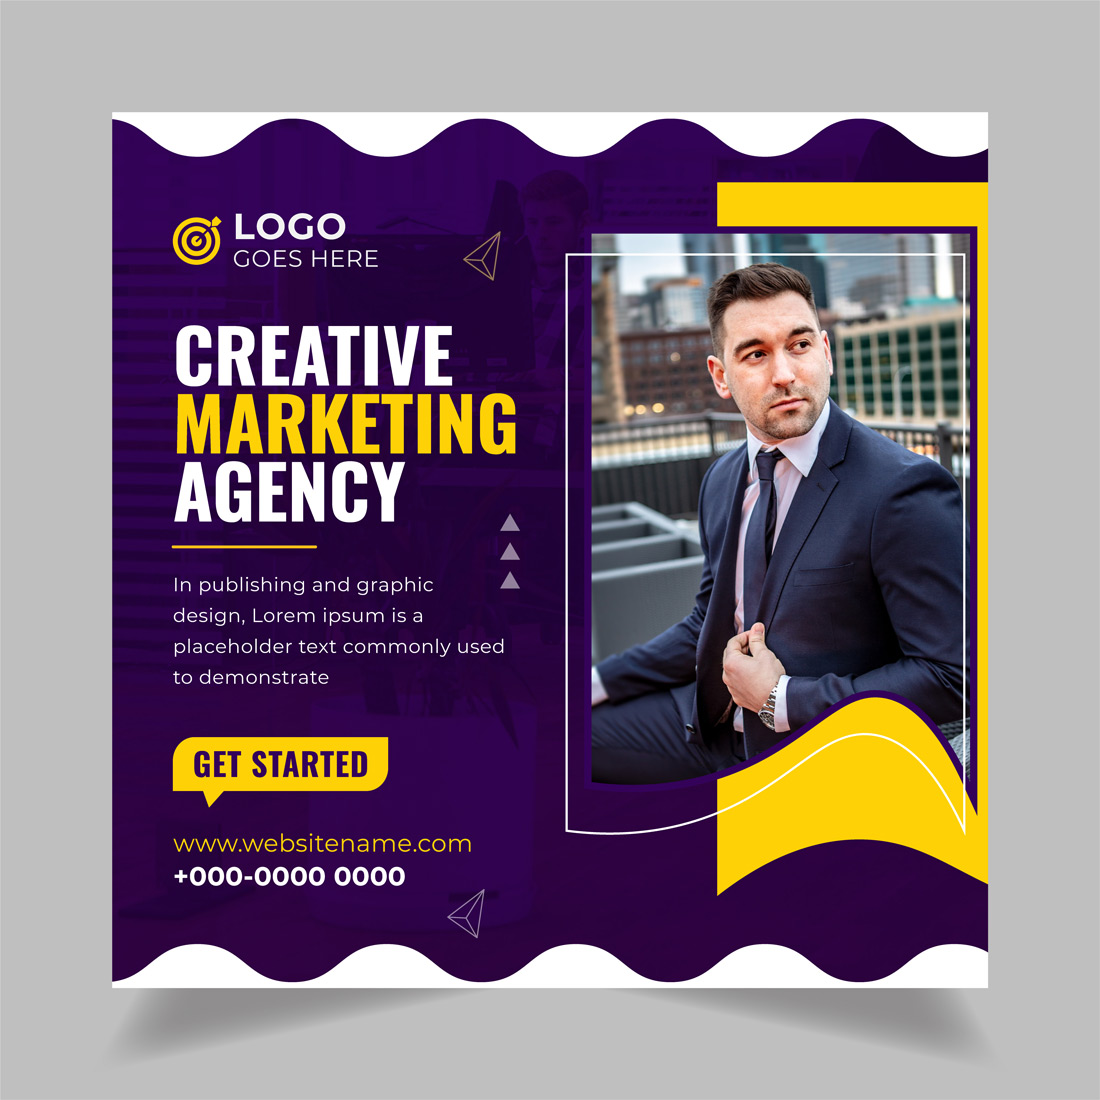 Purple and yellow business flyer with a man in a suit.